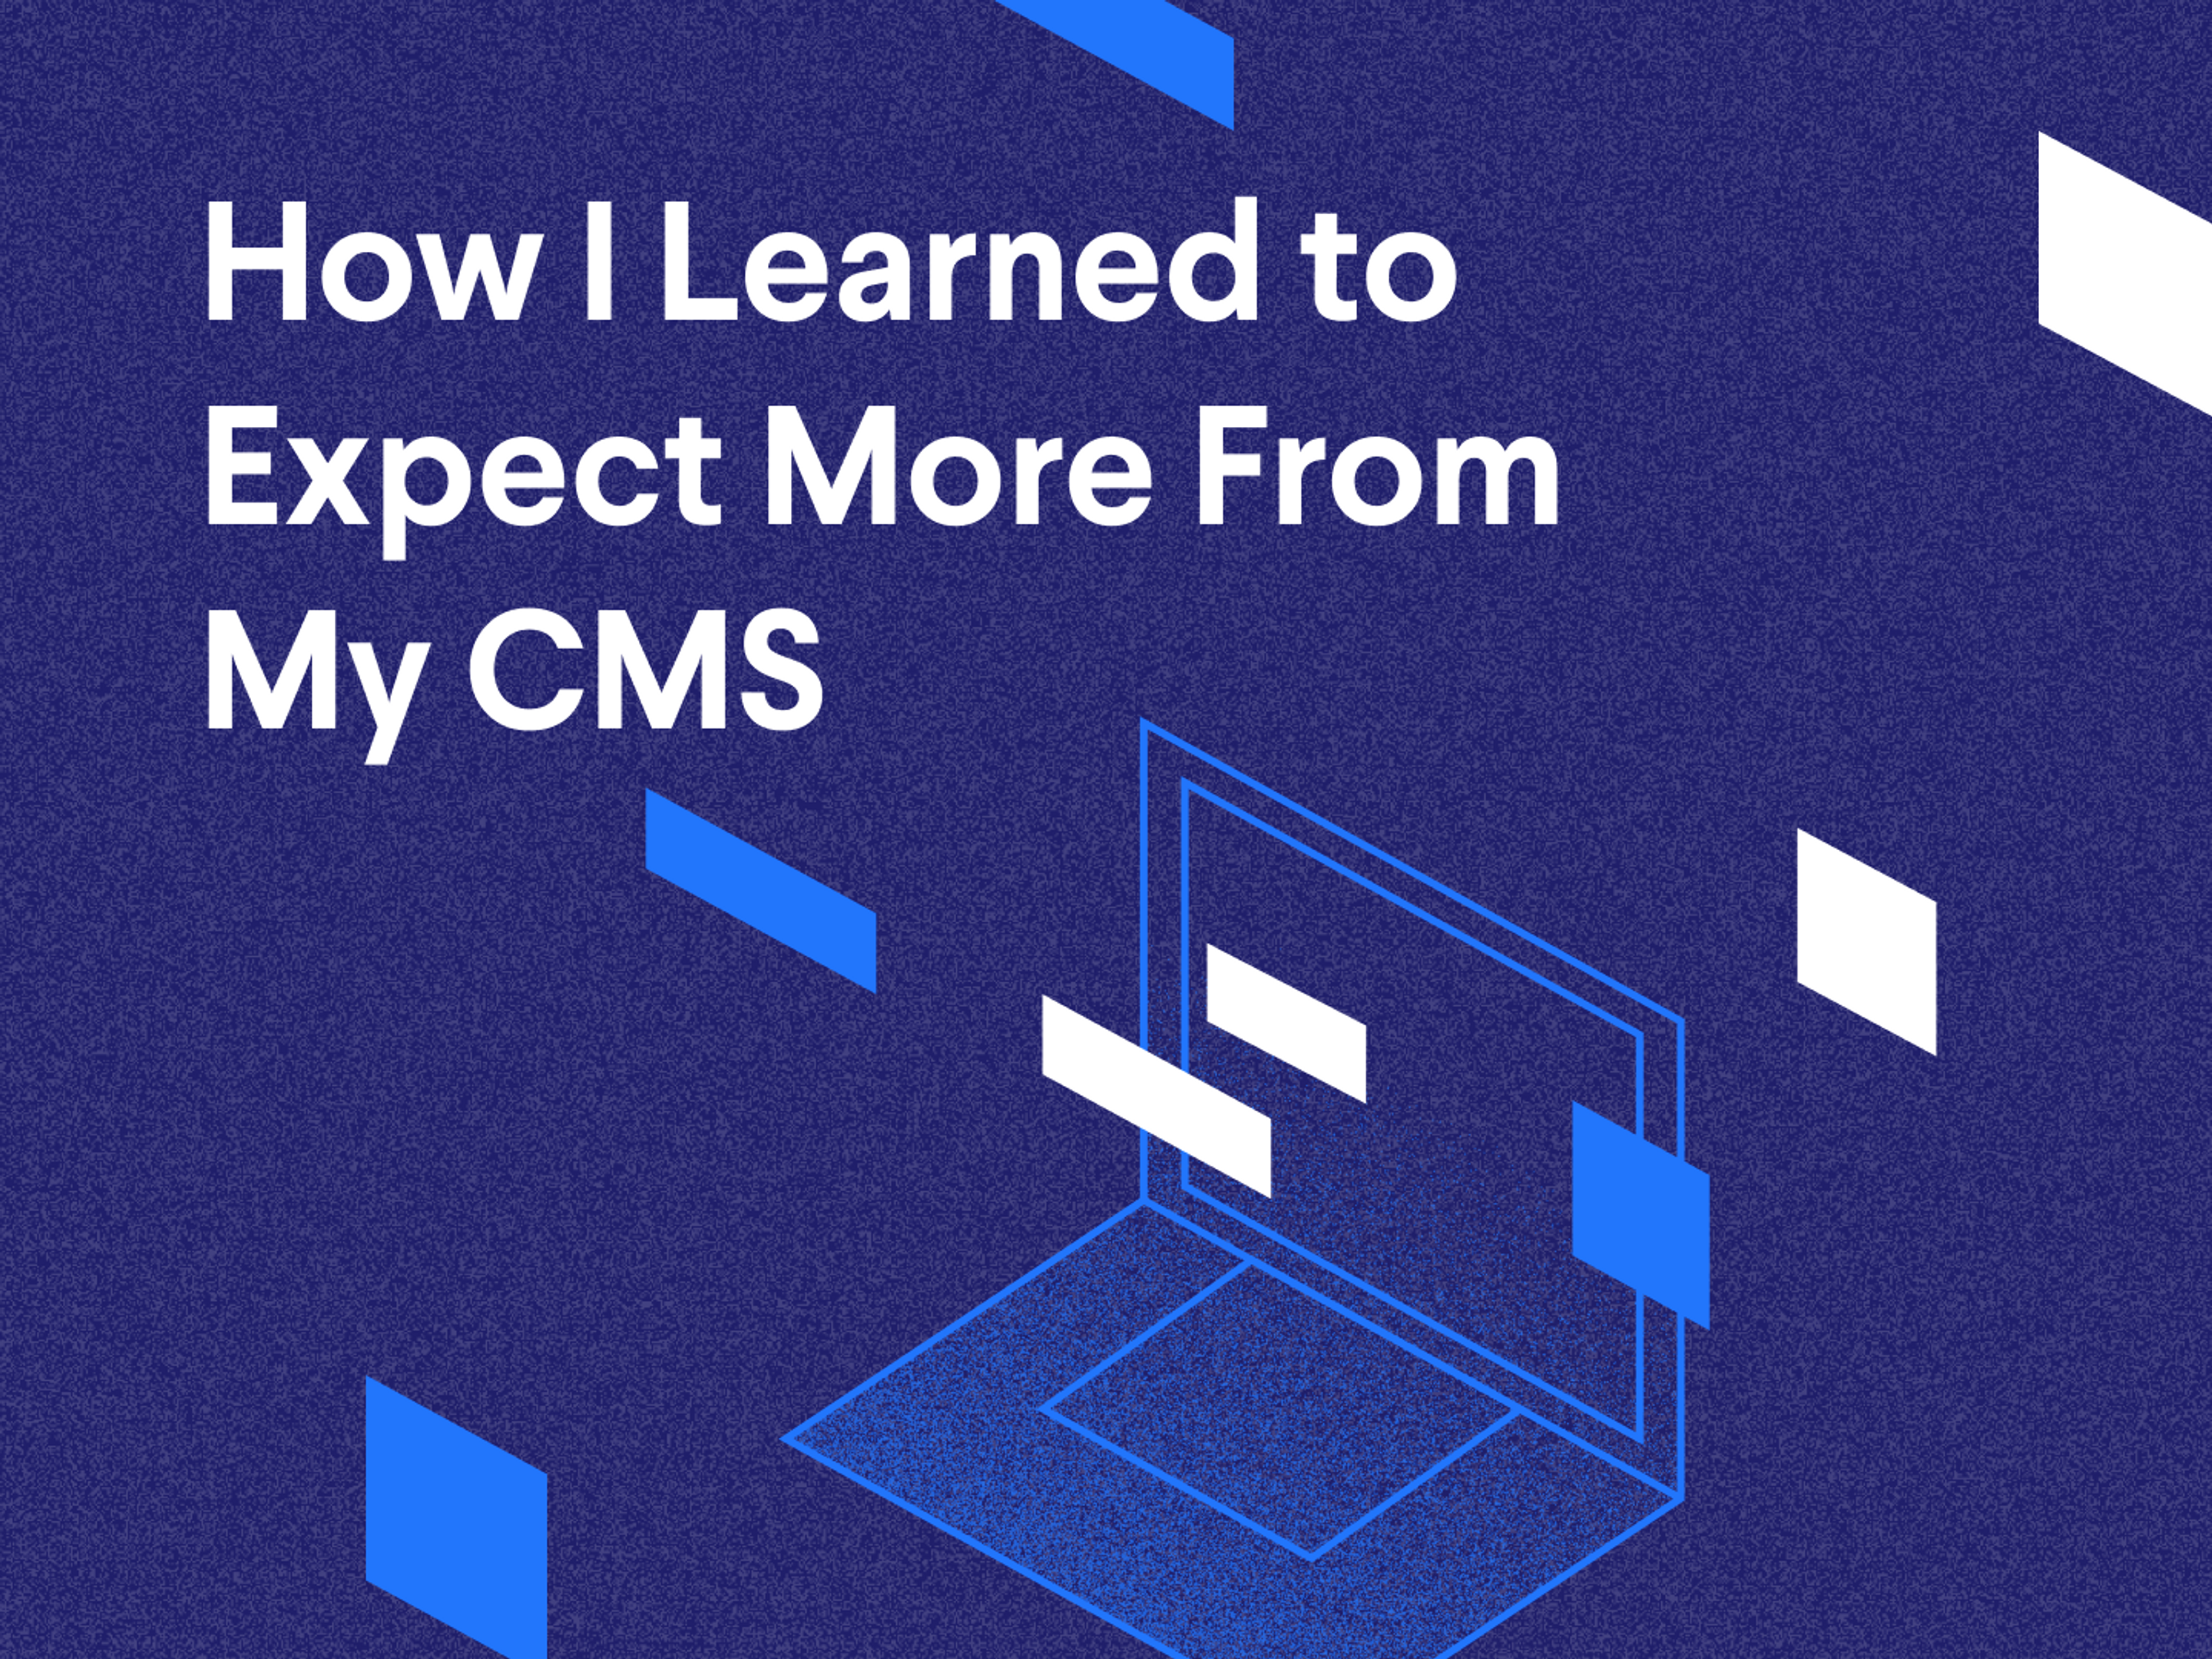 How I learned to expect more from my CMS